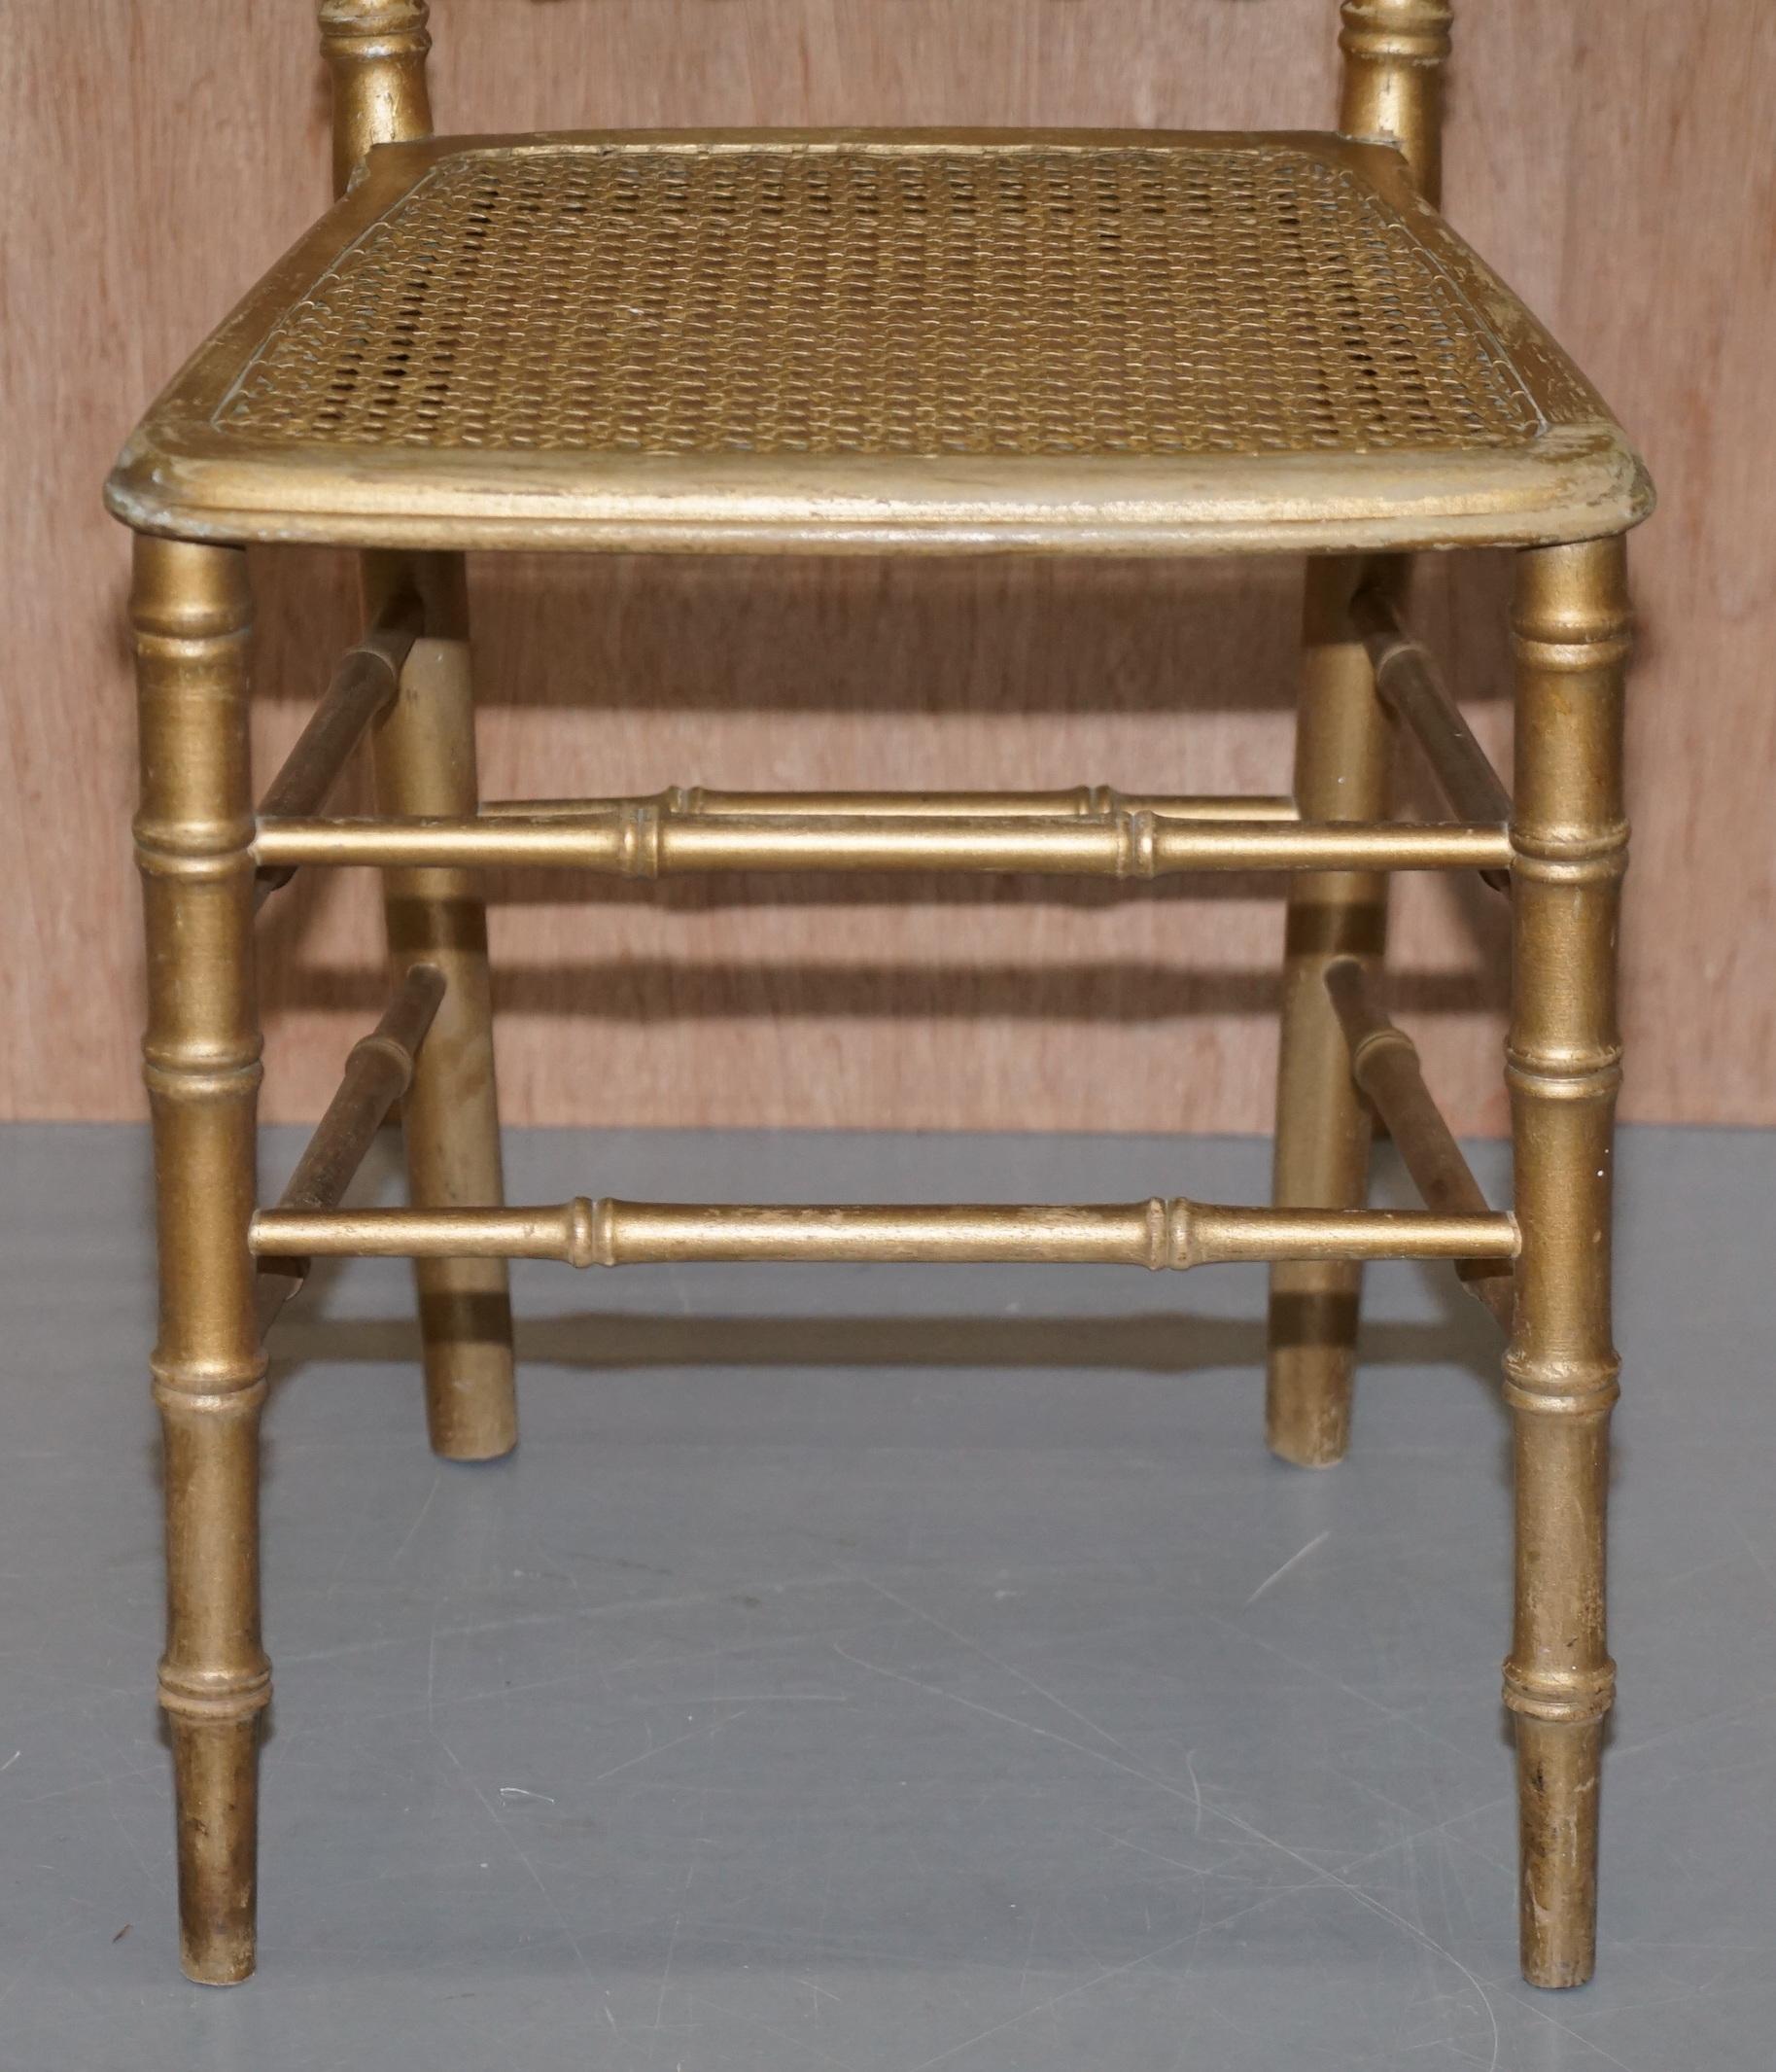 Pair of Edwardian Giltwood Famboo Regency Style Bergere Chairs with Gold Gilding For Sale 1